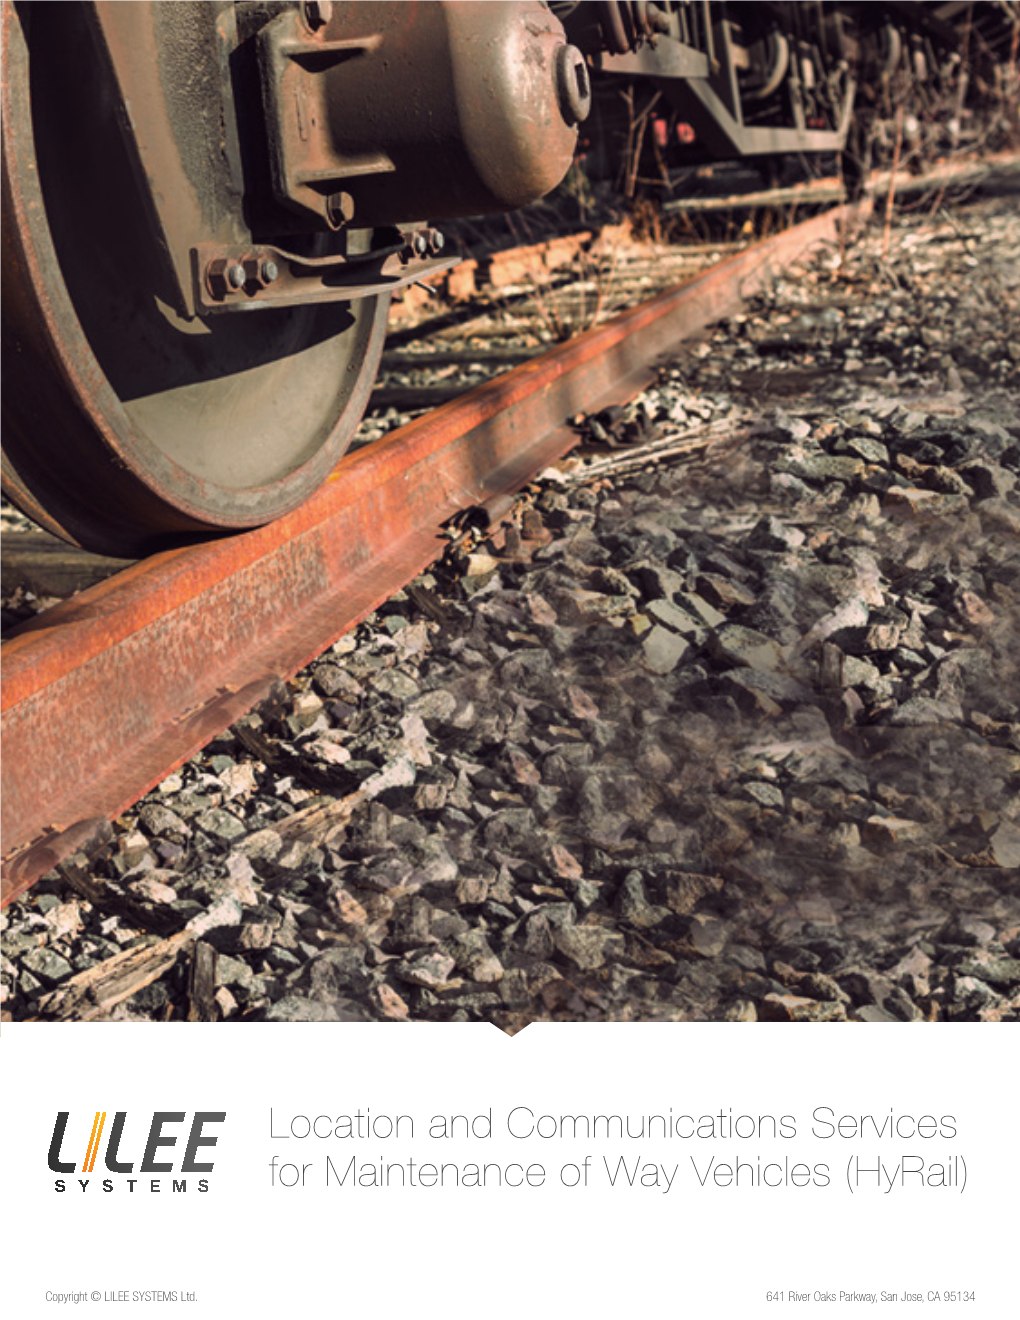 Location and Communications Services for Maintenance of Way Vehicles (Hyrail)